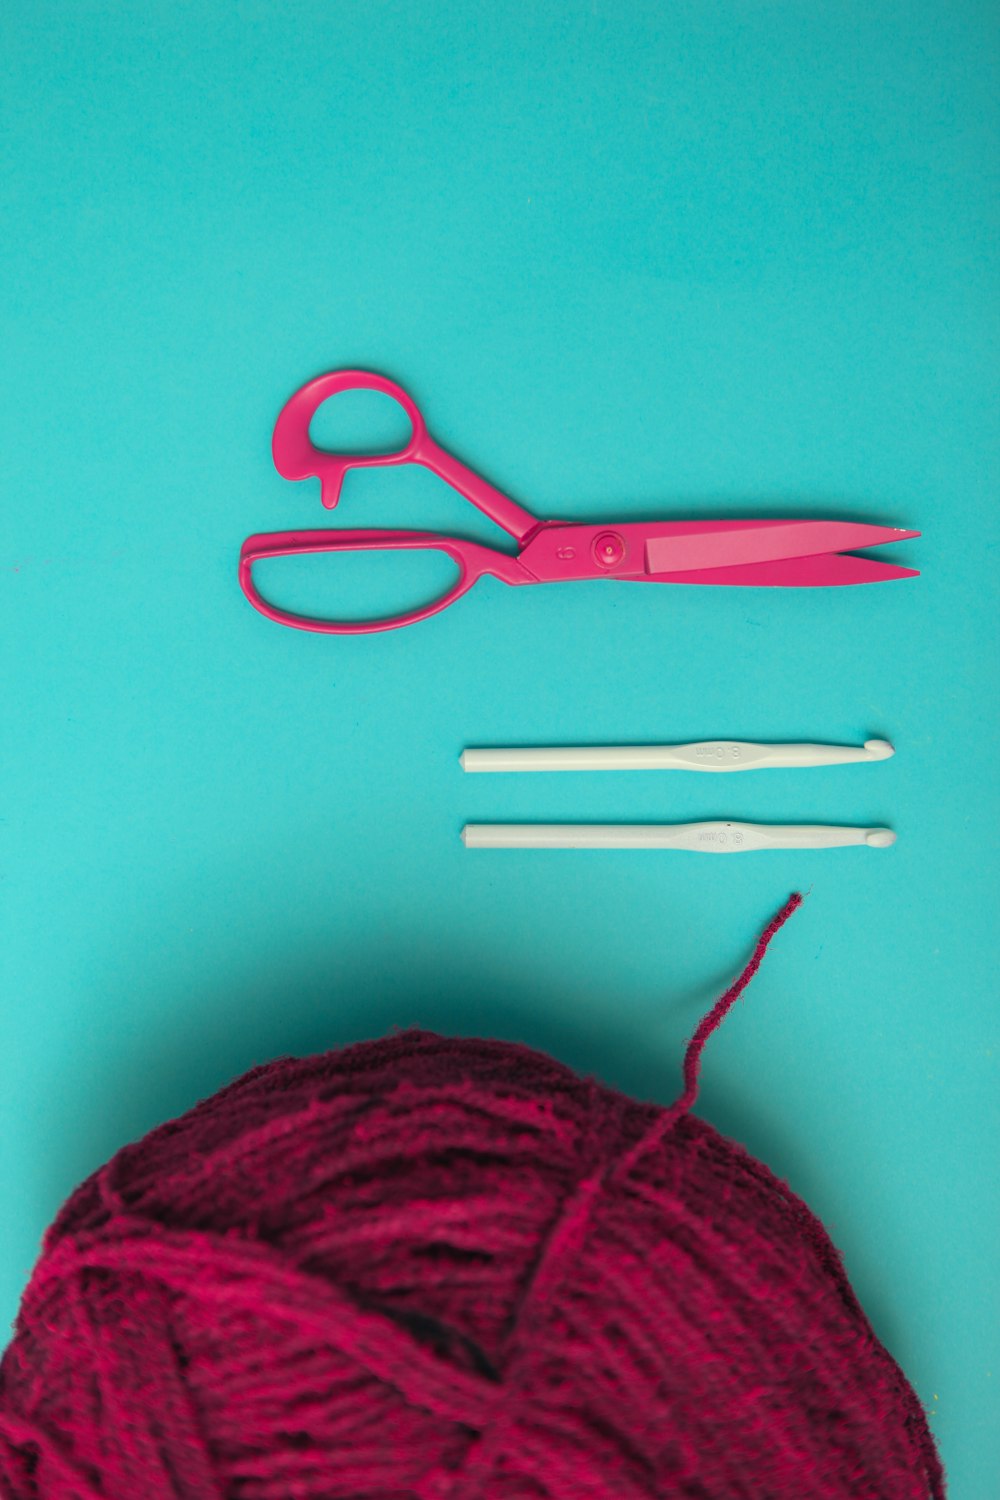 a ball of yarn, a pair of scissors, and a pair of knitting needles